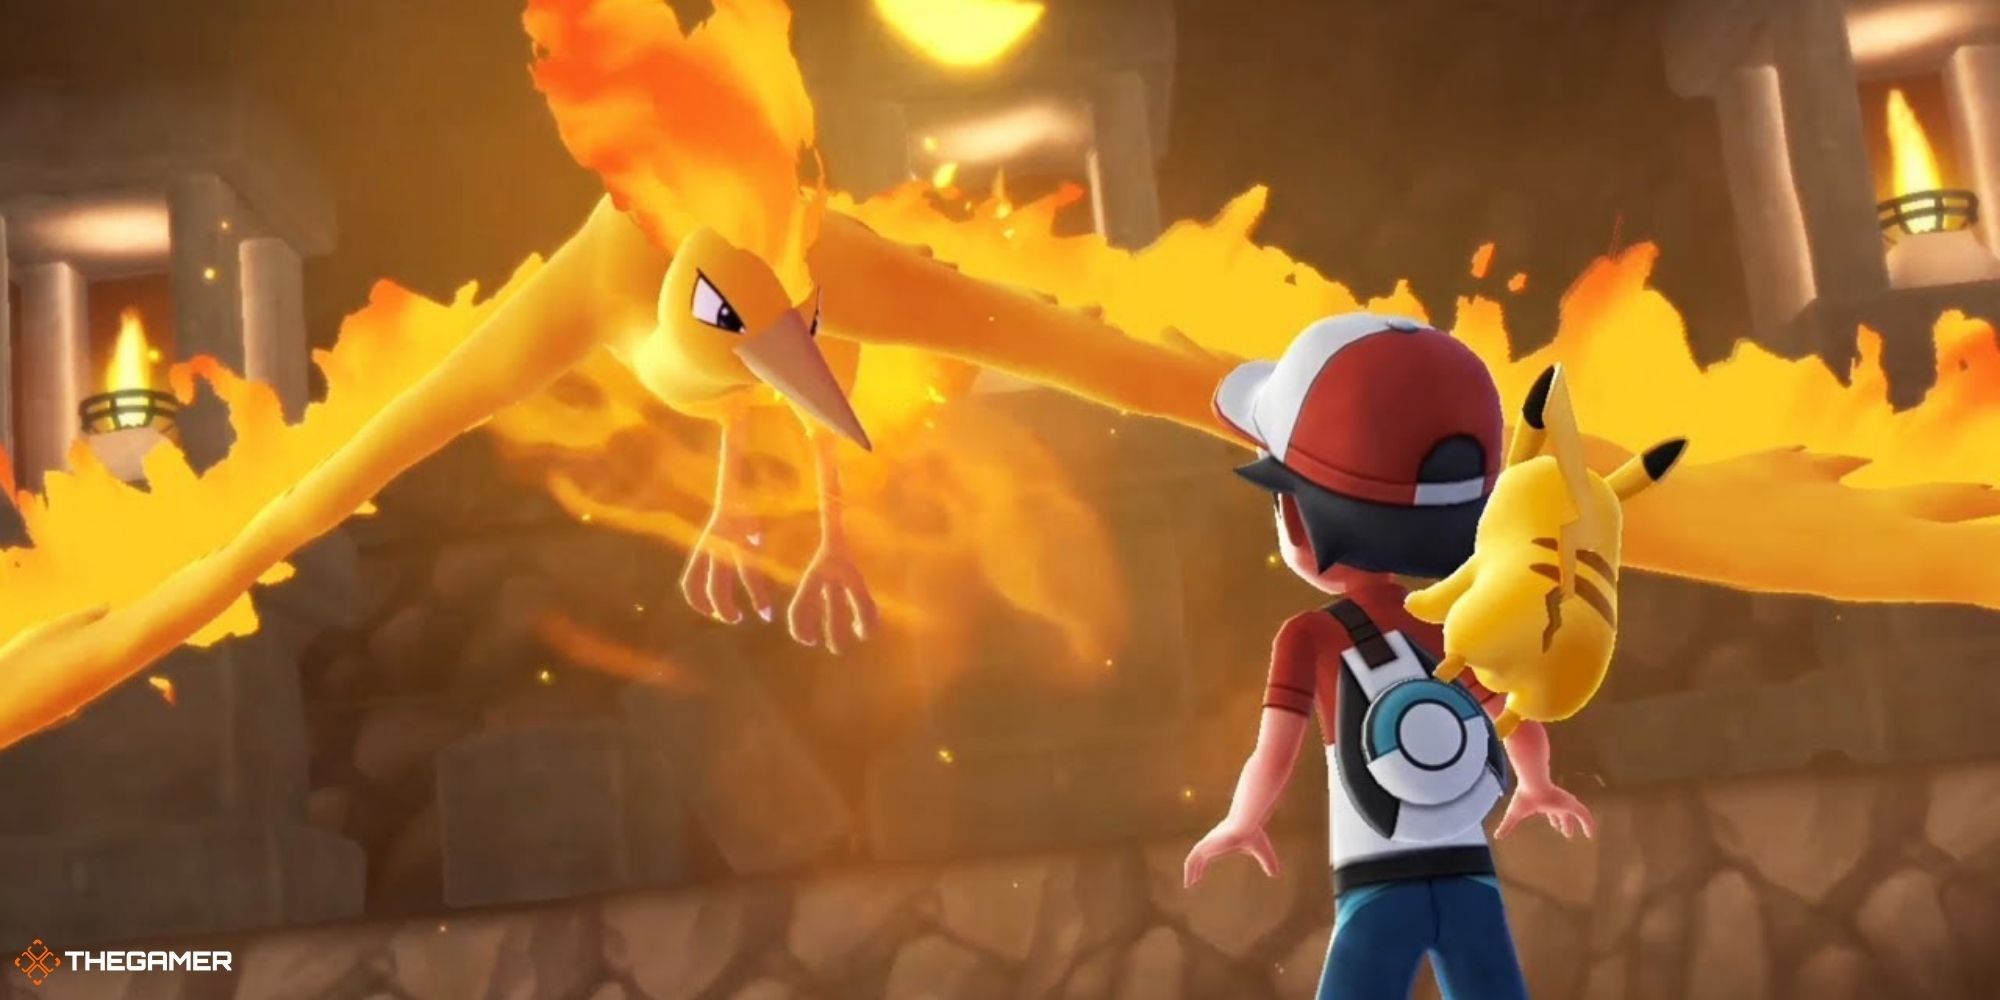 Let's Go Pikachu and Eevee - Moltres staring down player in battle